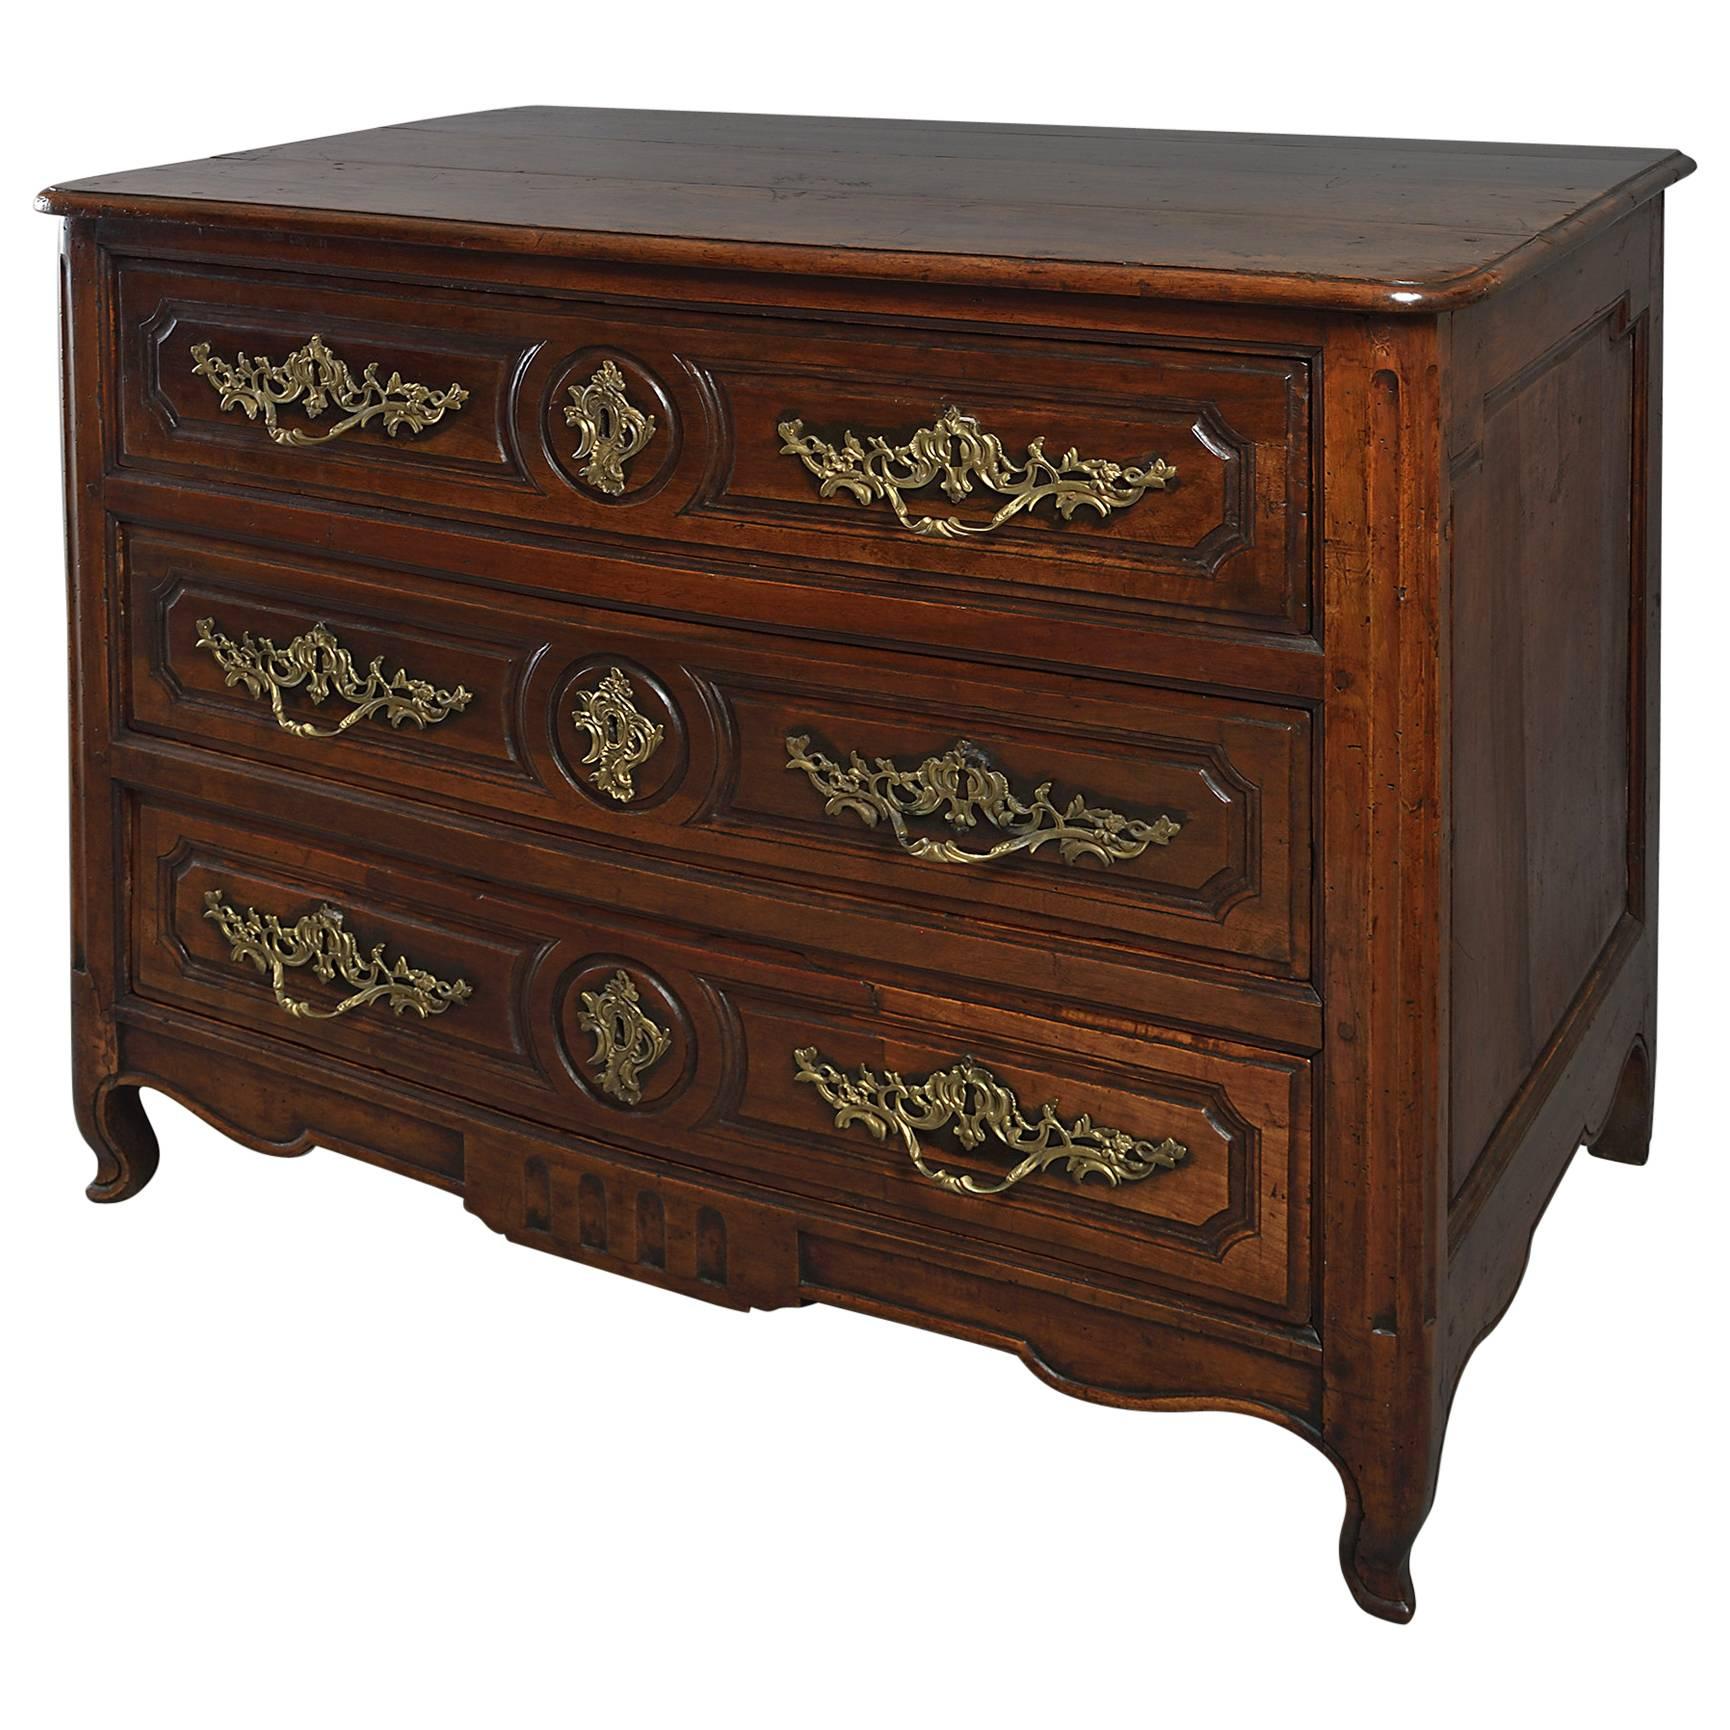 18th Century Louis XV Period Rococo Walnut Commode or Chest of Drawers